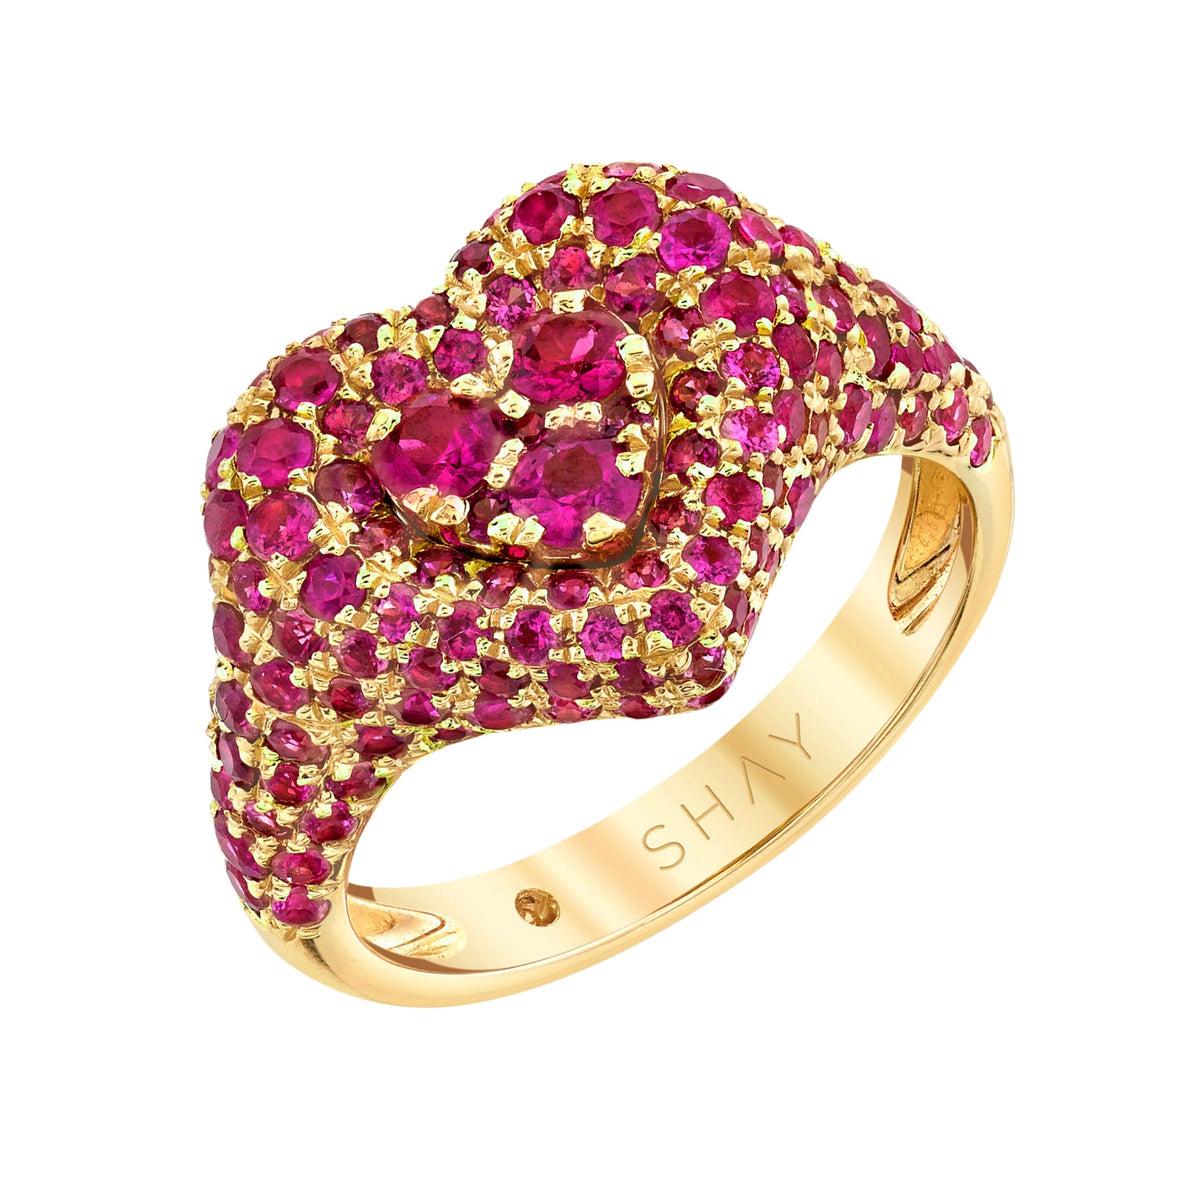 PINK SAPPHIRE PAVE HEART PINKY RING